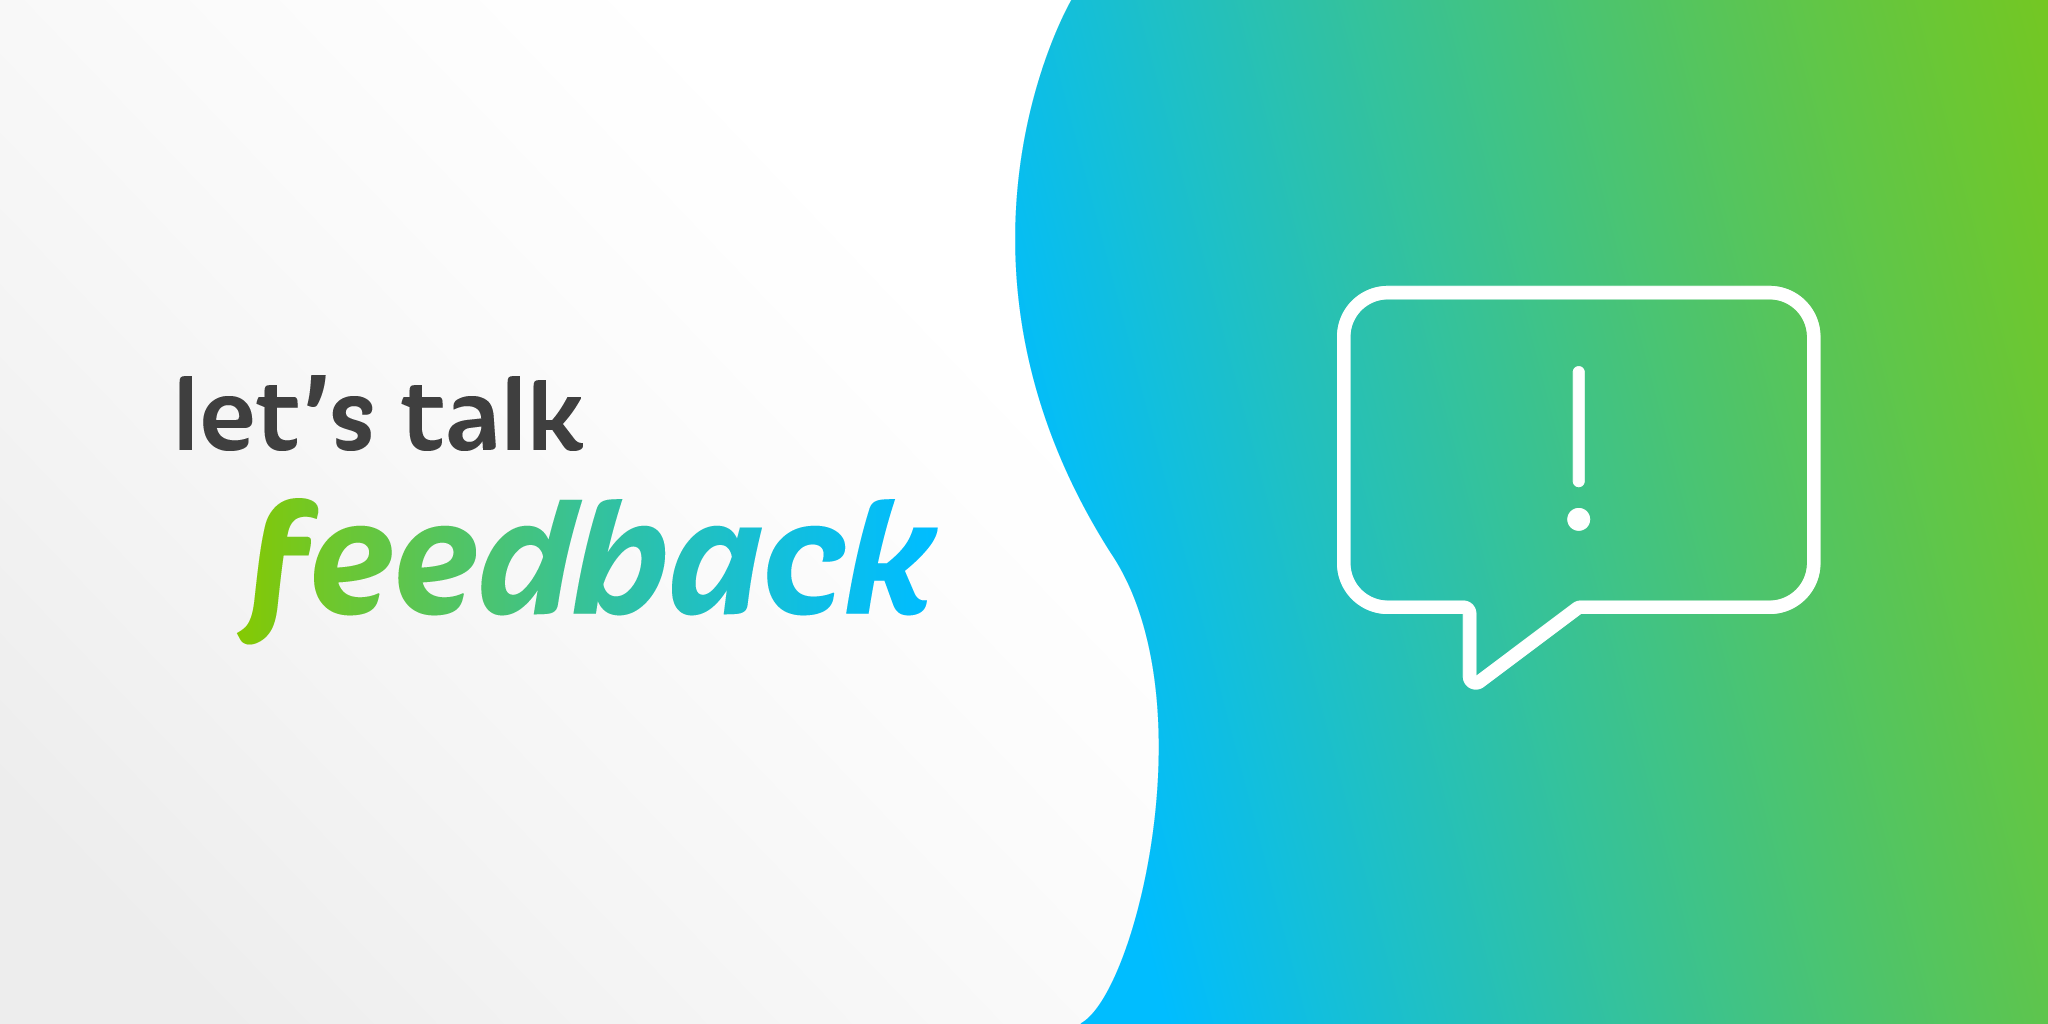 blue and green image with "Let's talk feedback" text